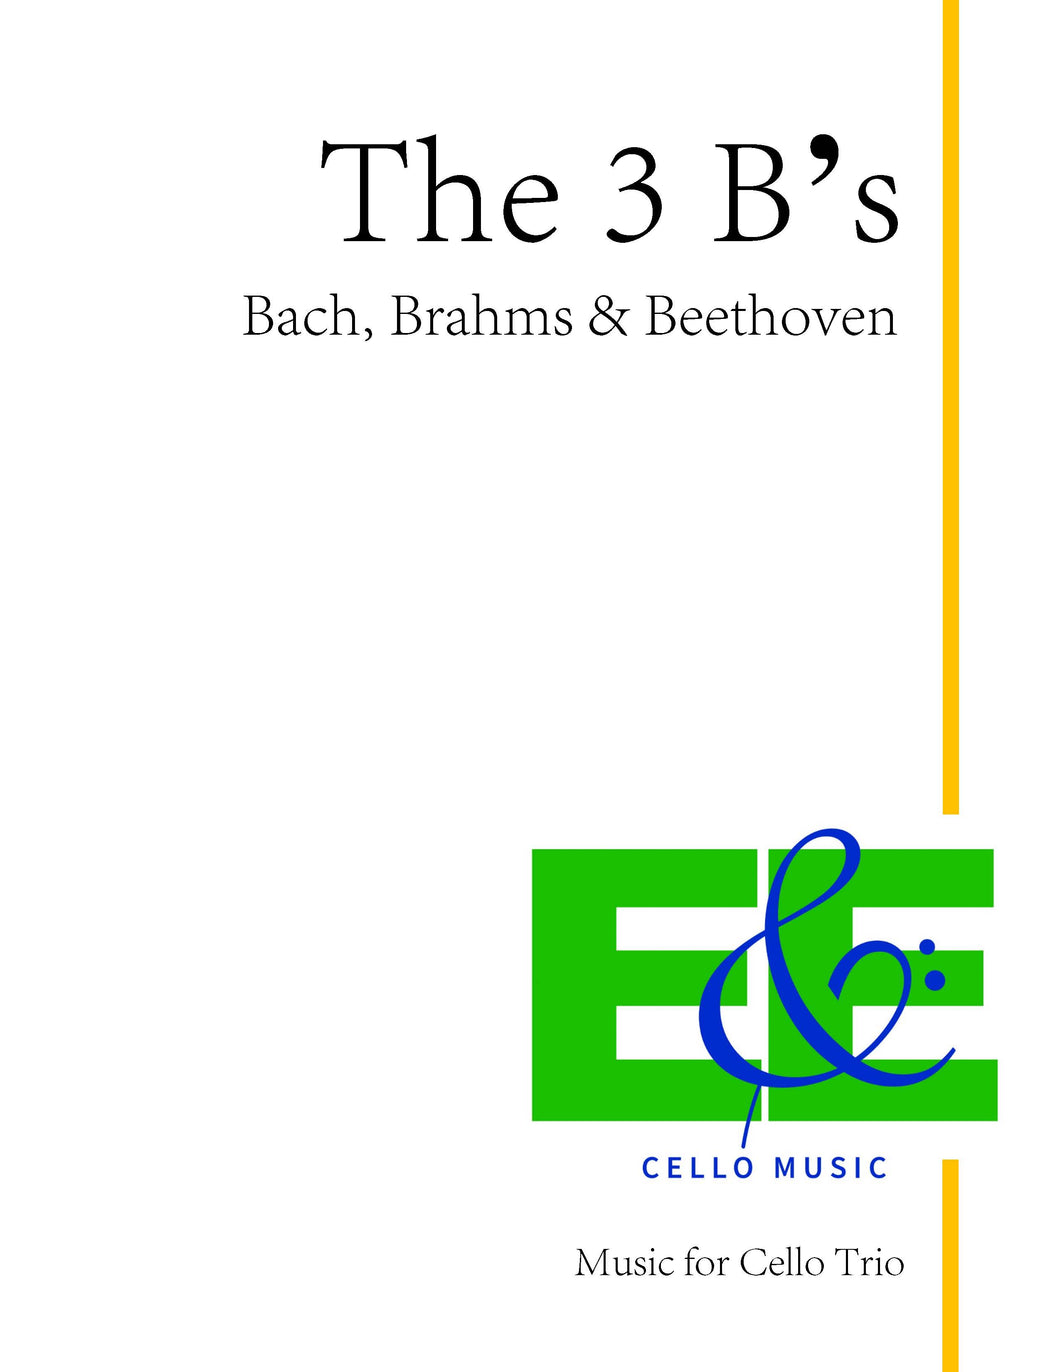 The 3 B's: Bach, Brahms<br> & Beethoven<br> Music for Cello Trio